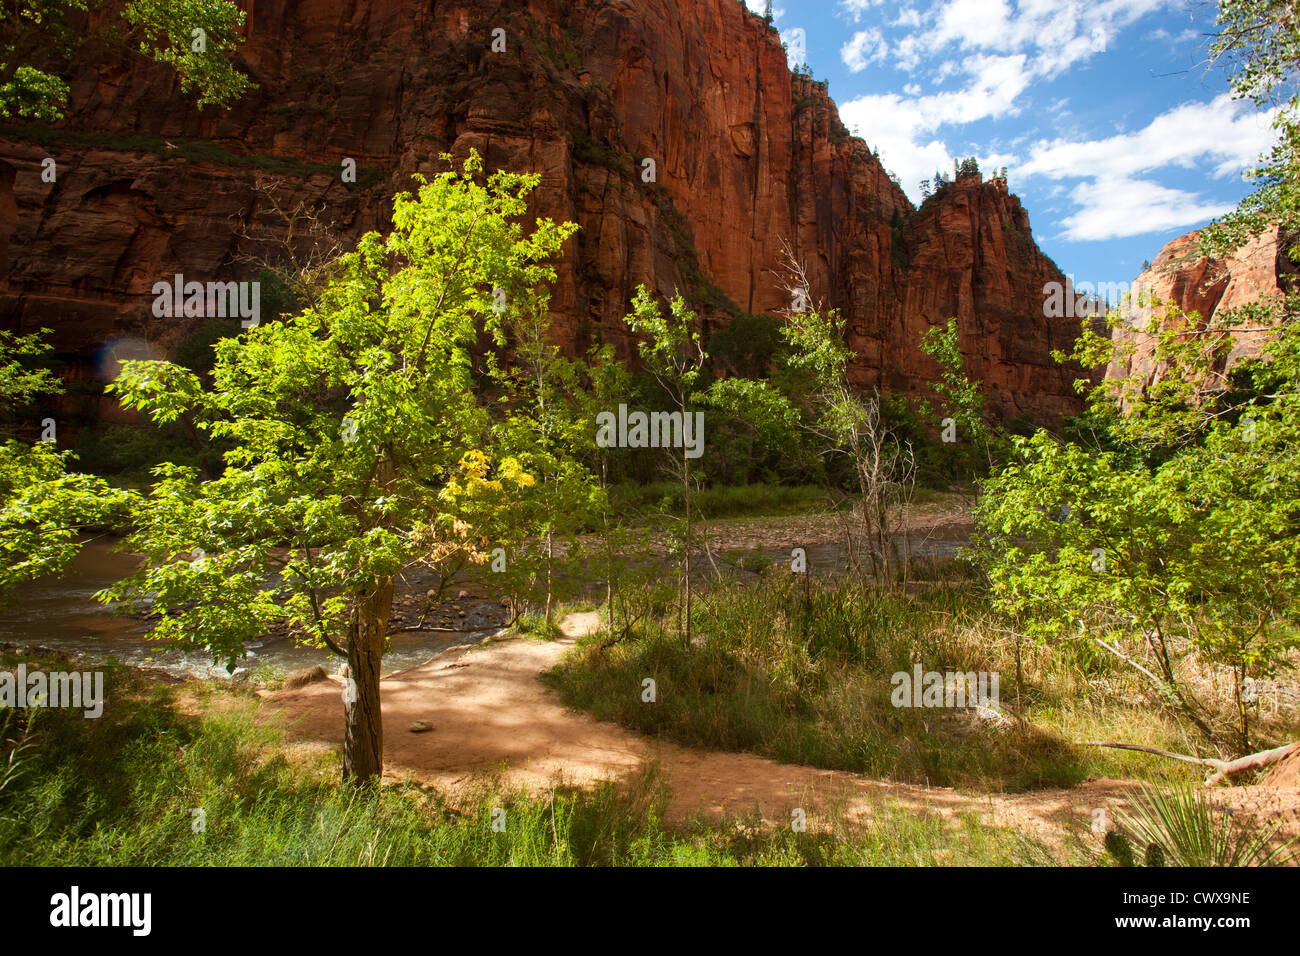 Zion Canyon National Park, Utah, United States of America Banque D'Images